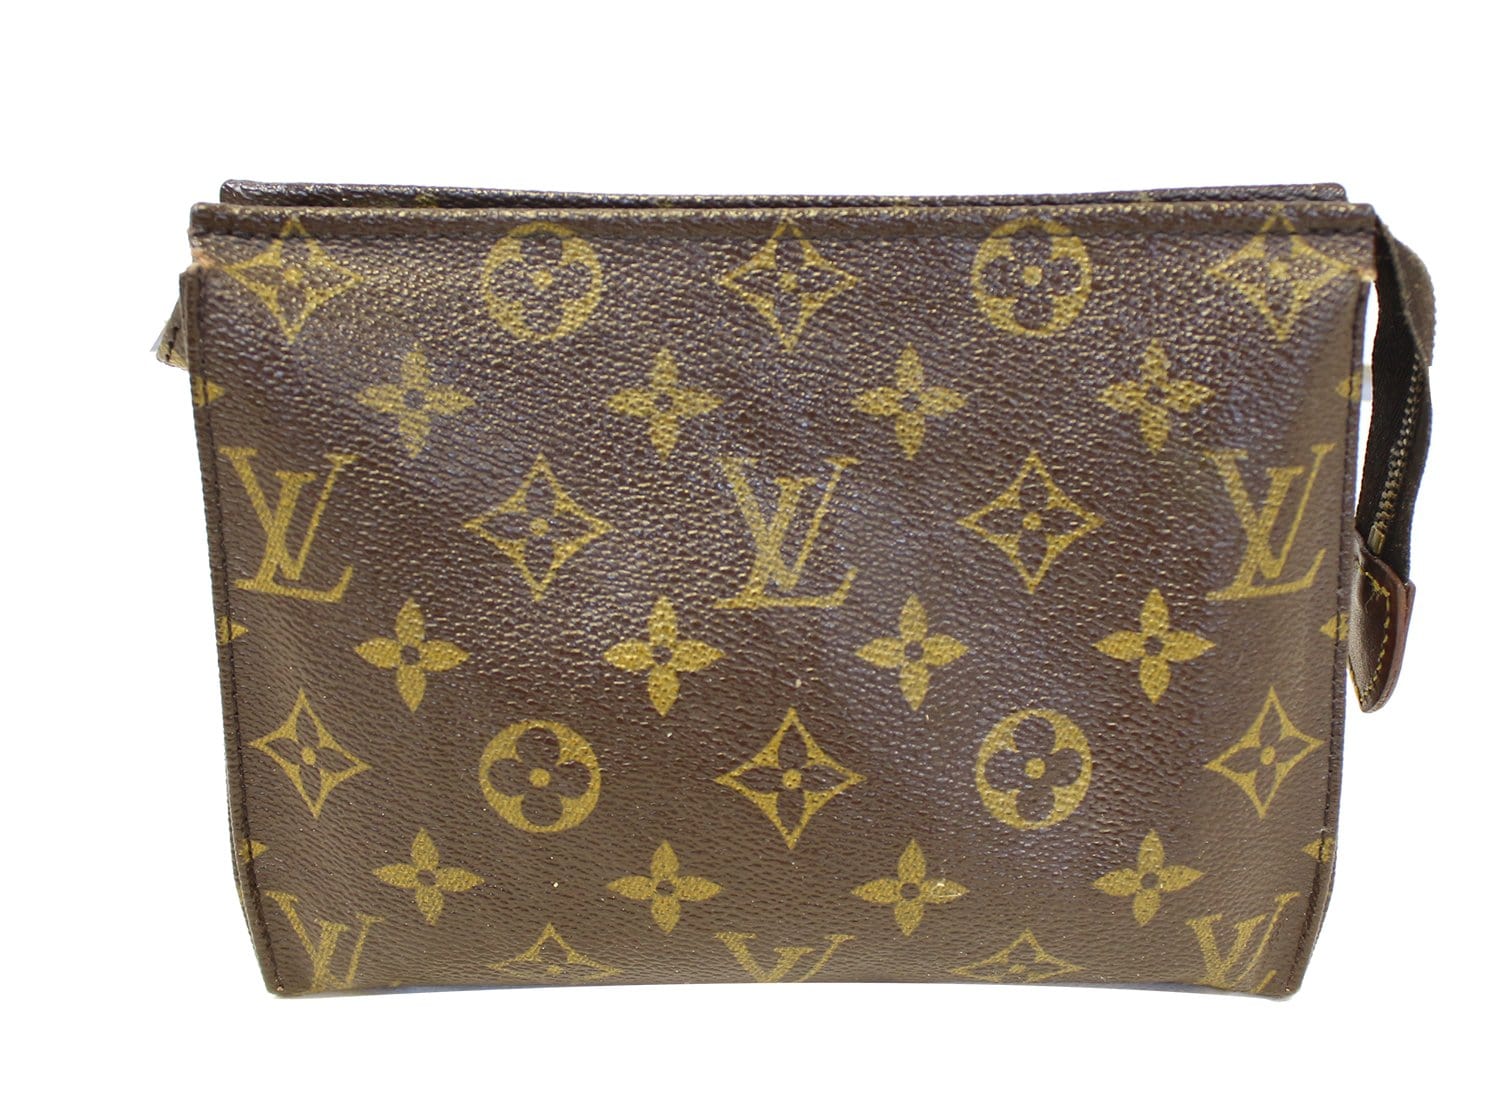 Louis Vuitton toiletries pouch 15 and 19